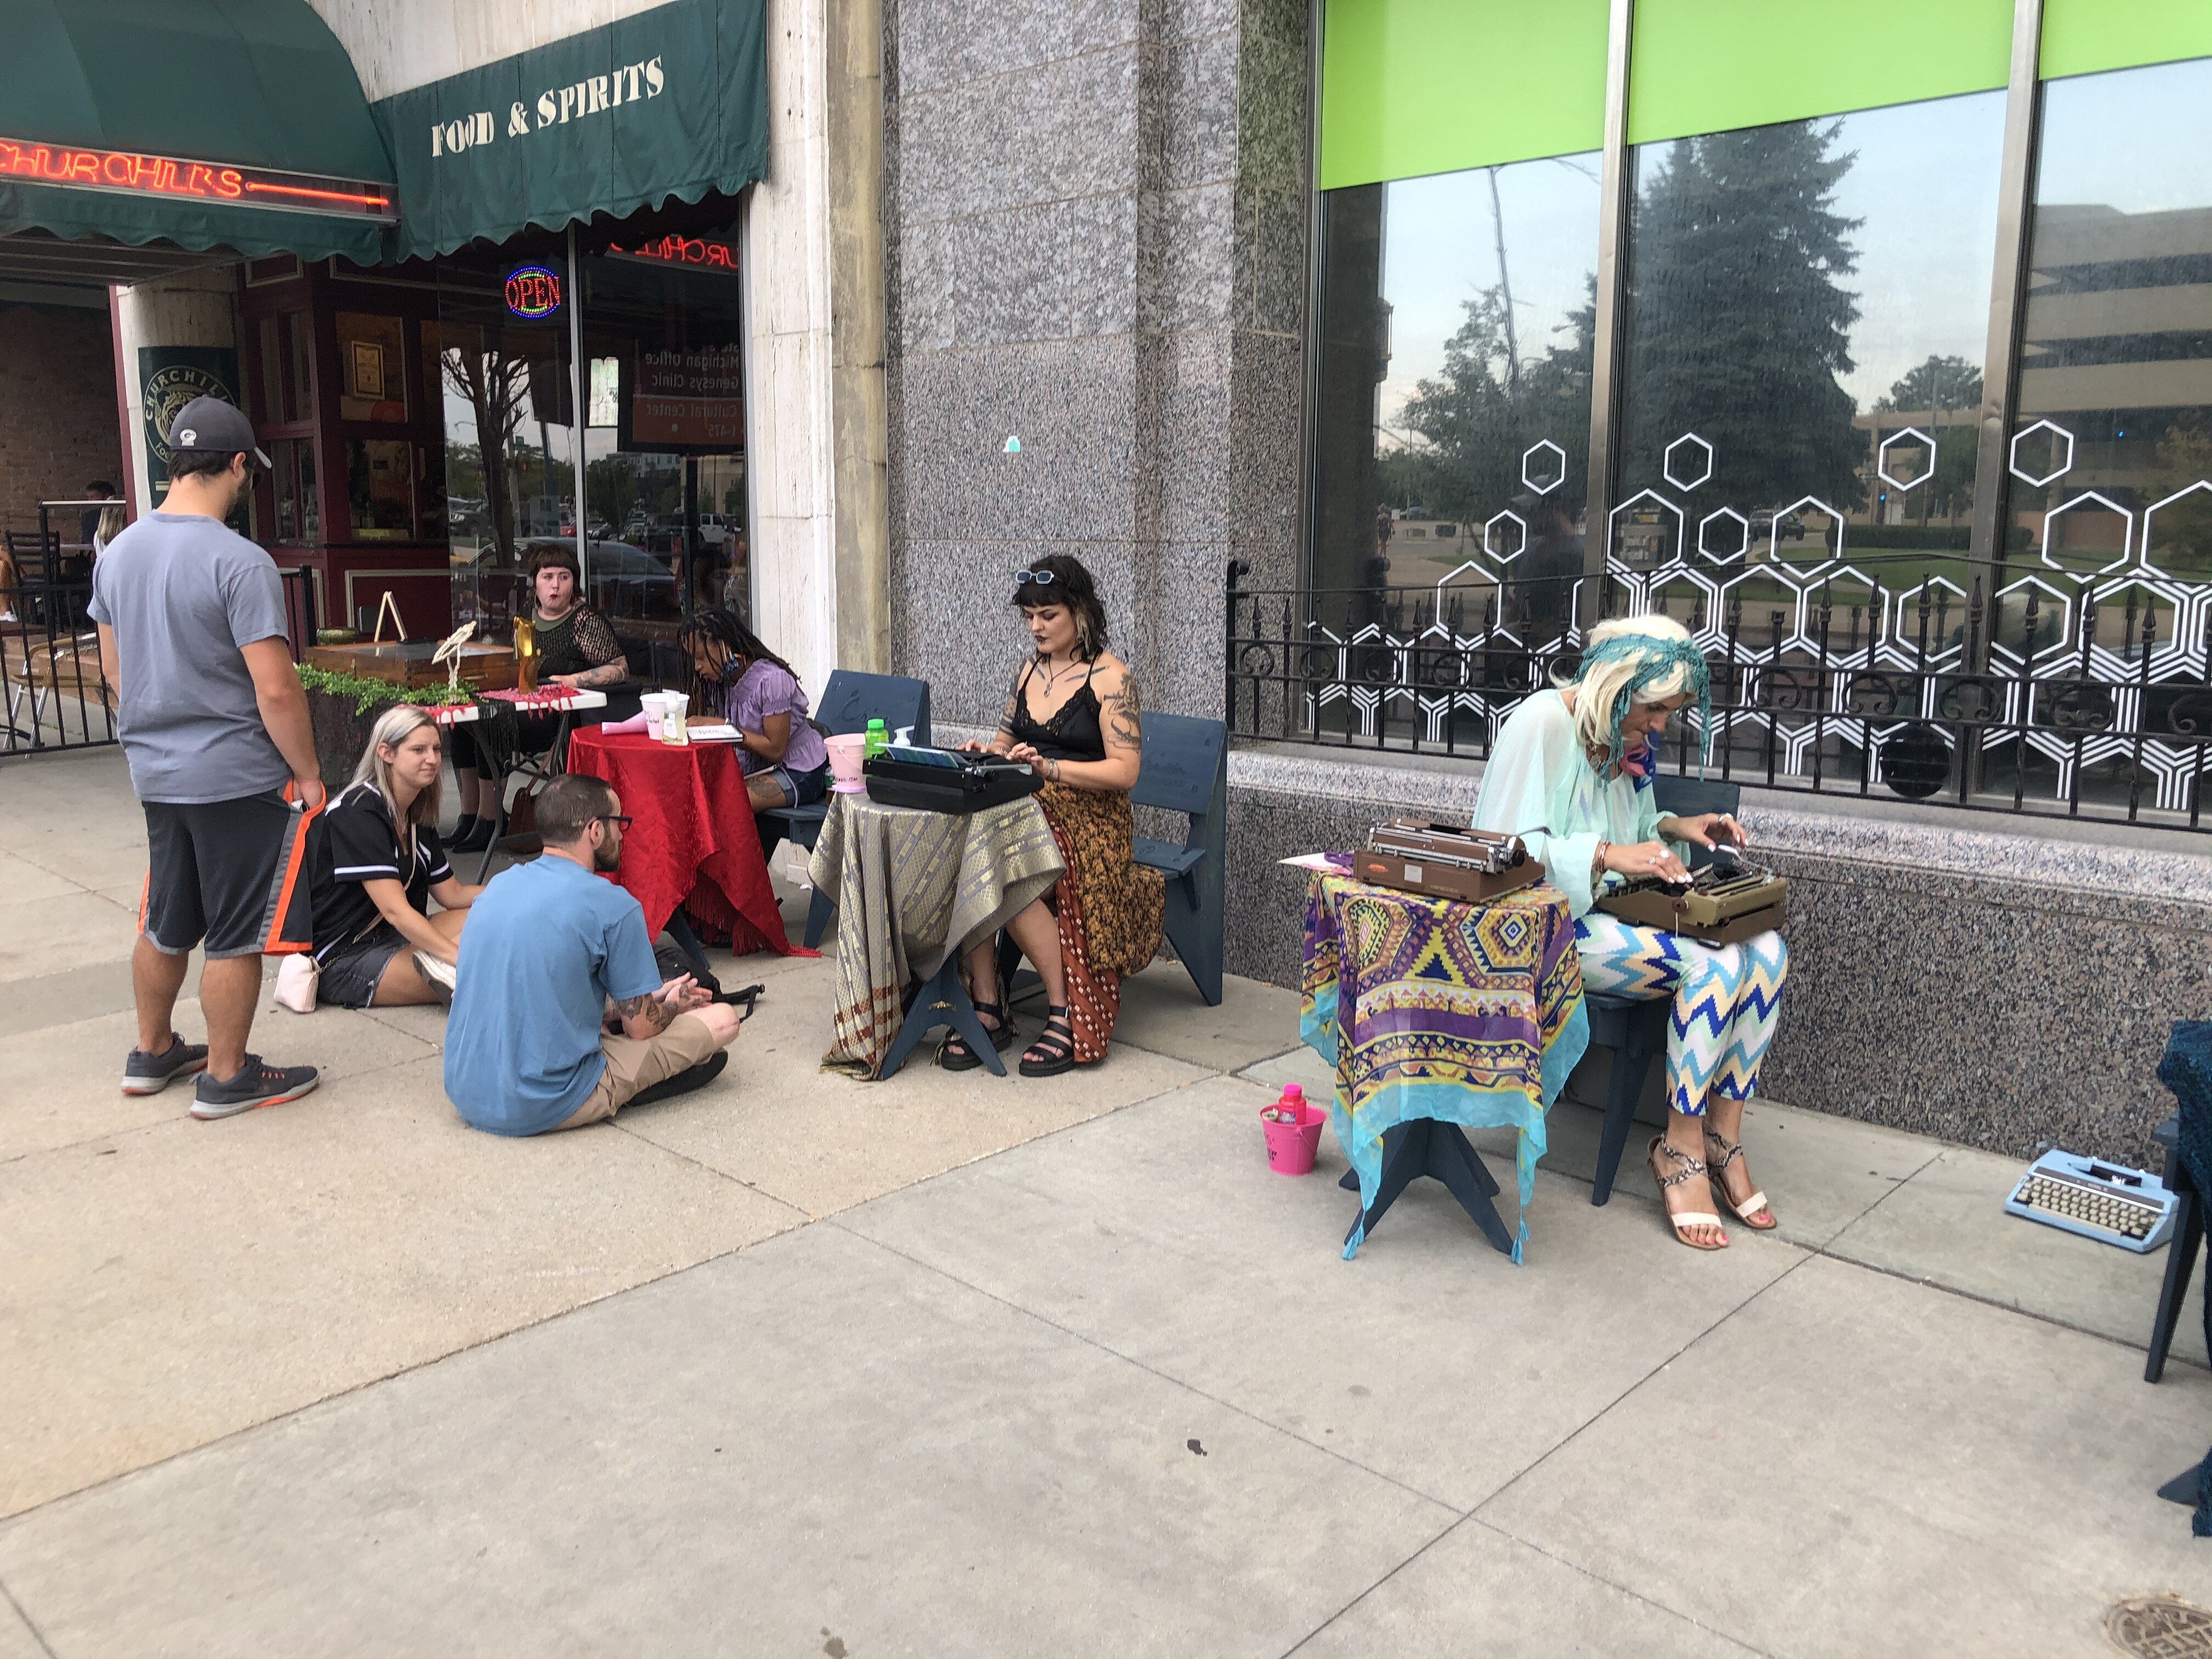 Five poets created 74 poems for passersby on August 14.